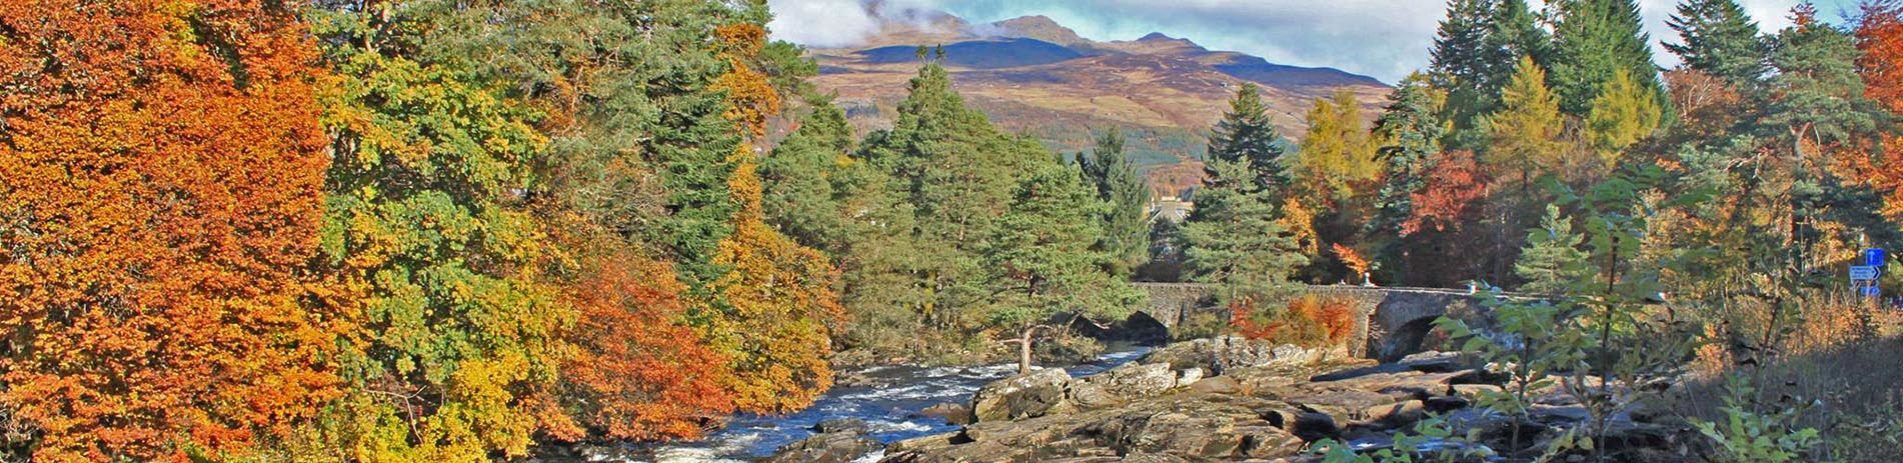 falls-of-dochart-and-ancient-bridge-surrounded-by-trees-in-autumn-colours-with-high-mountains-in-the-distance